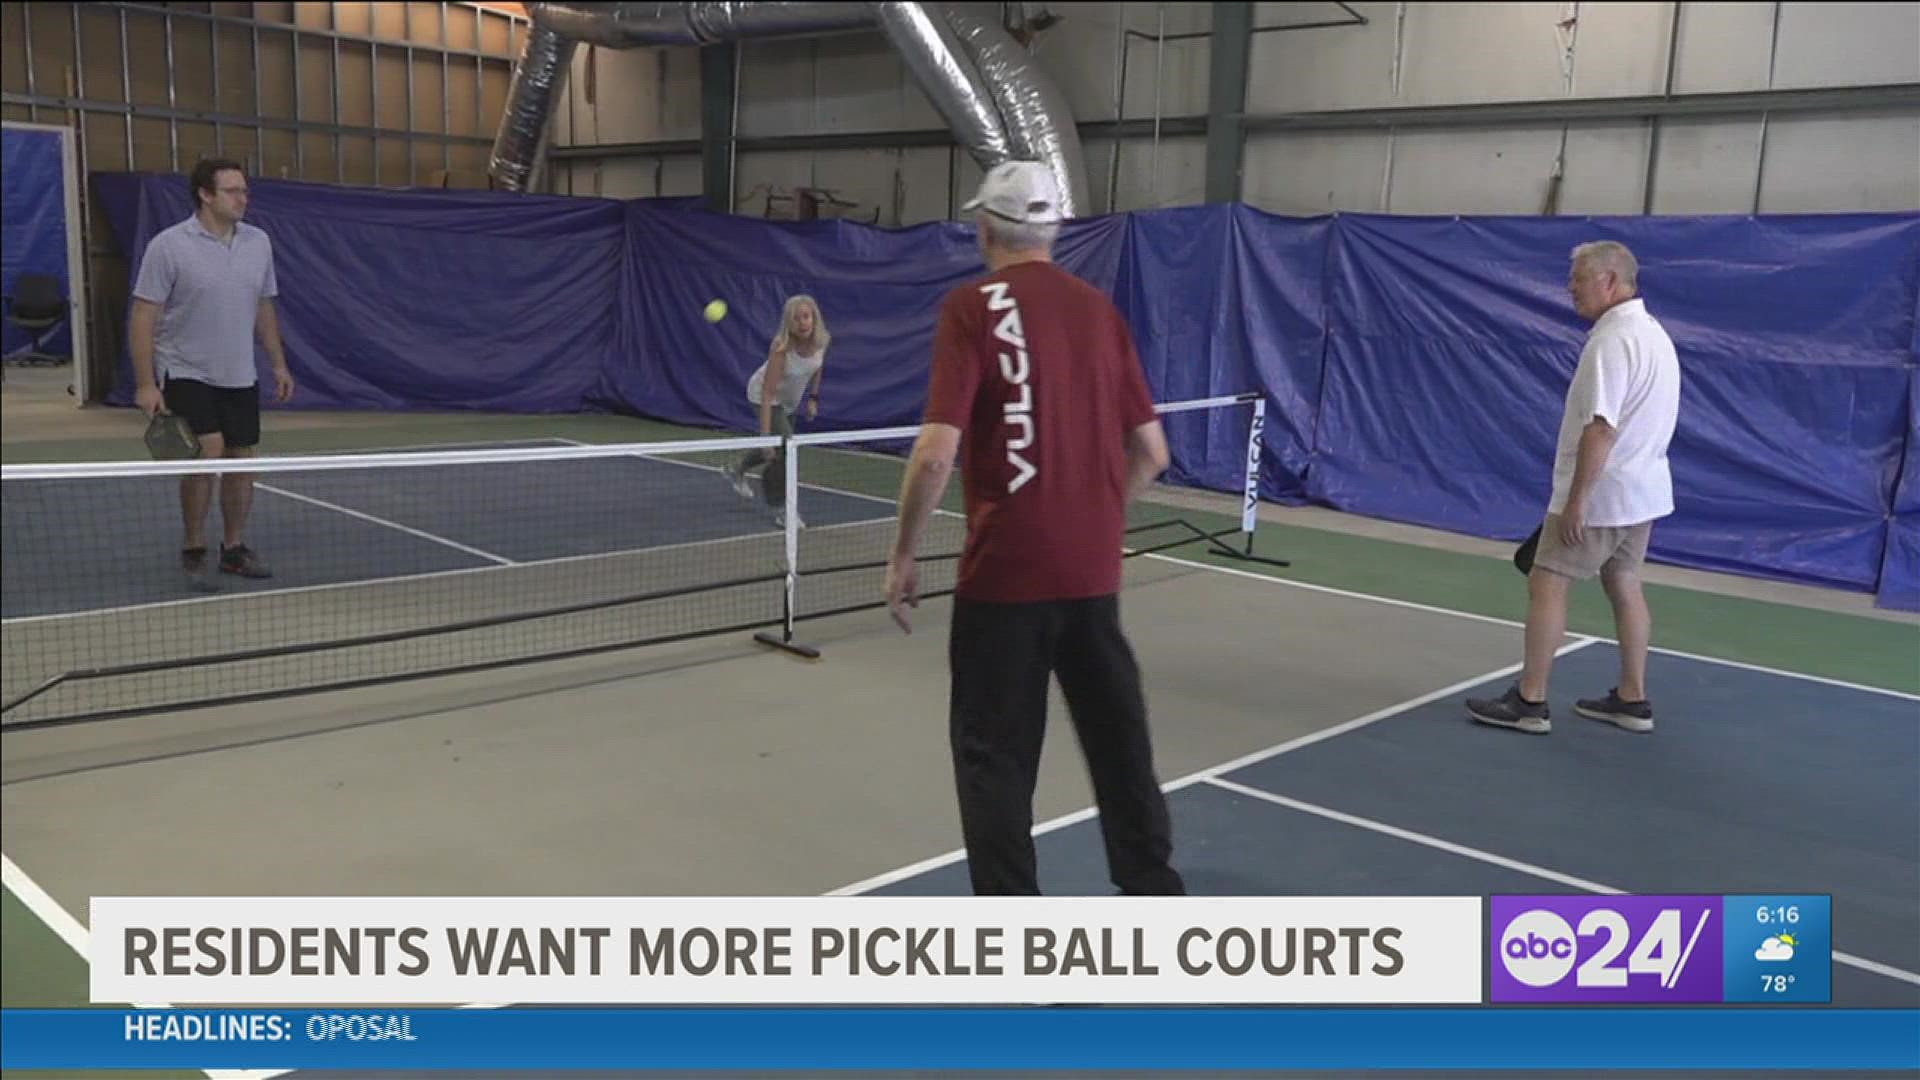 "The most underserved form of recreation in Germantown" happens to be a game growing in popularity called "Pickle Ball." Some residents are voicing their concerns.